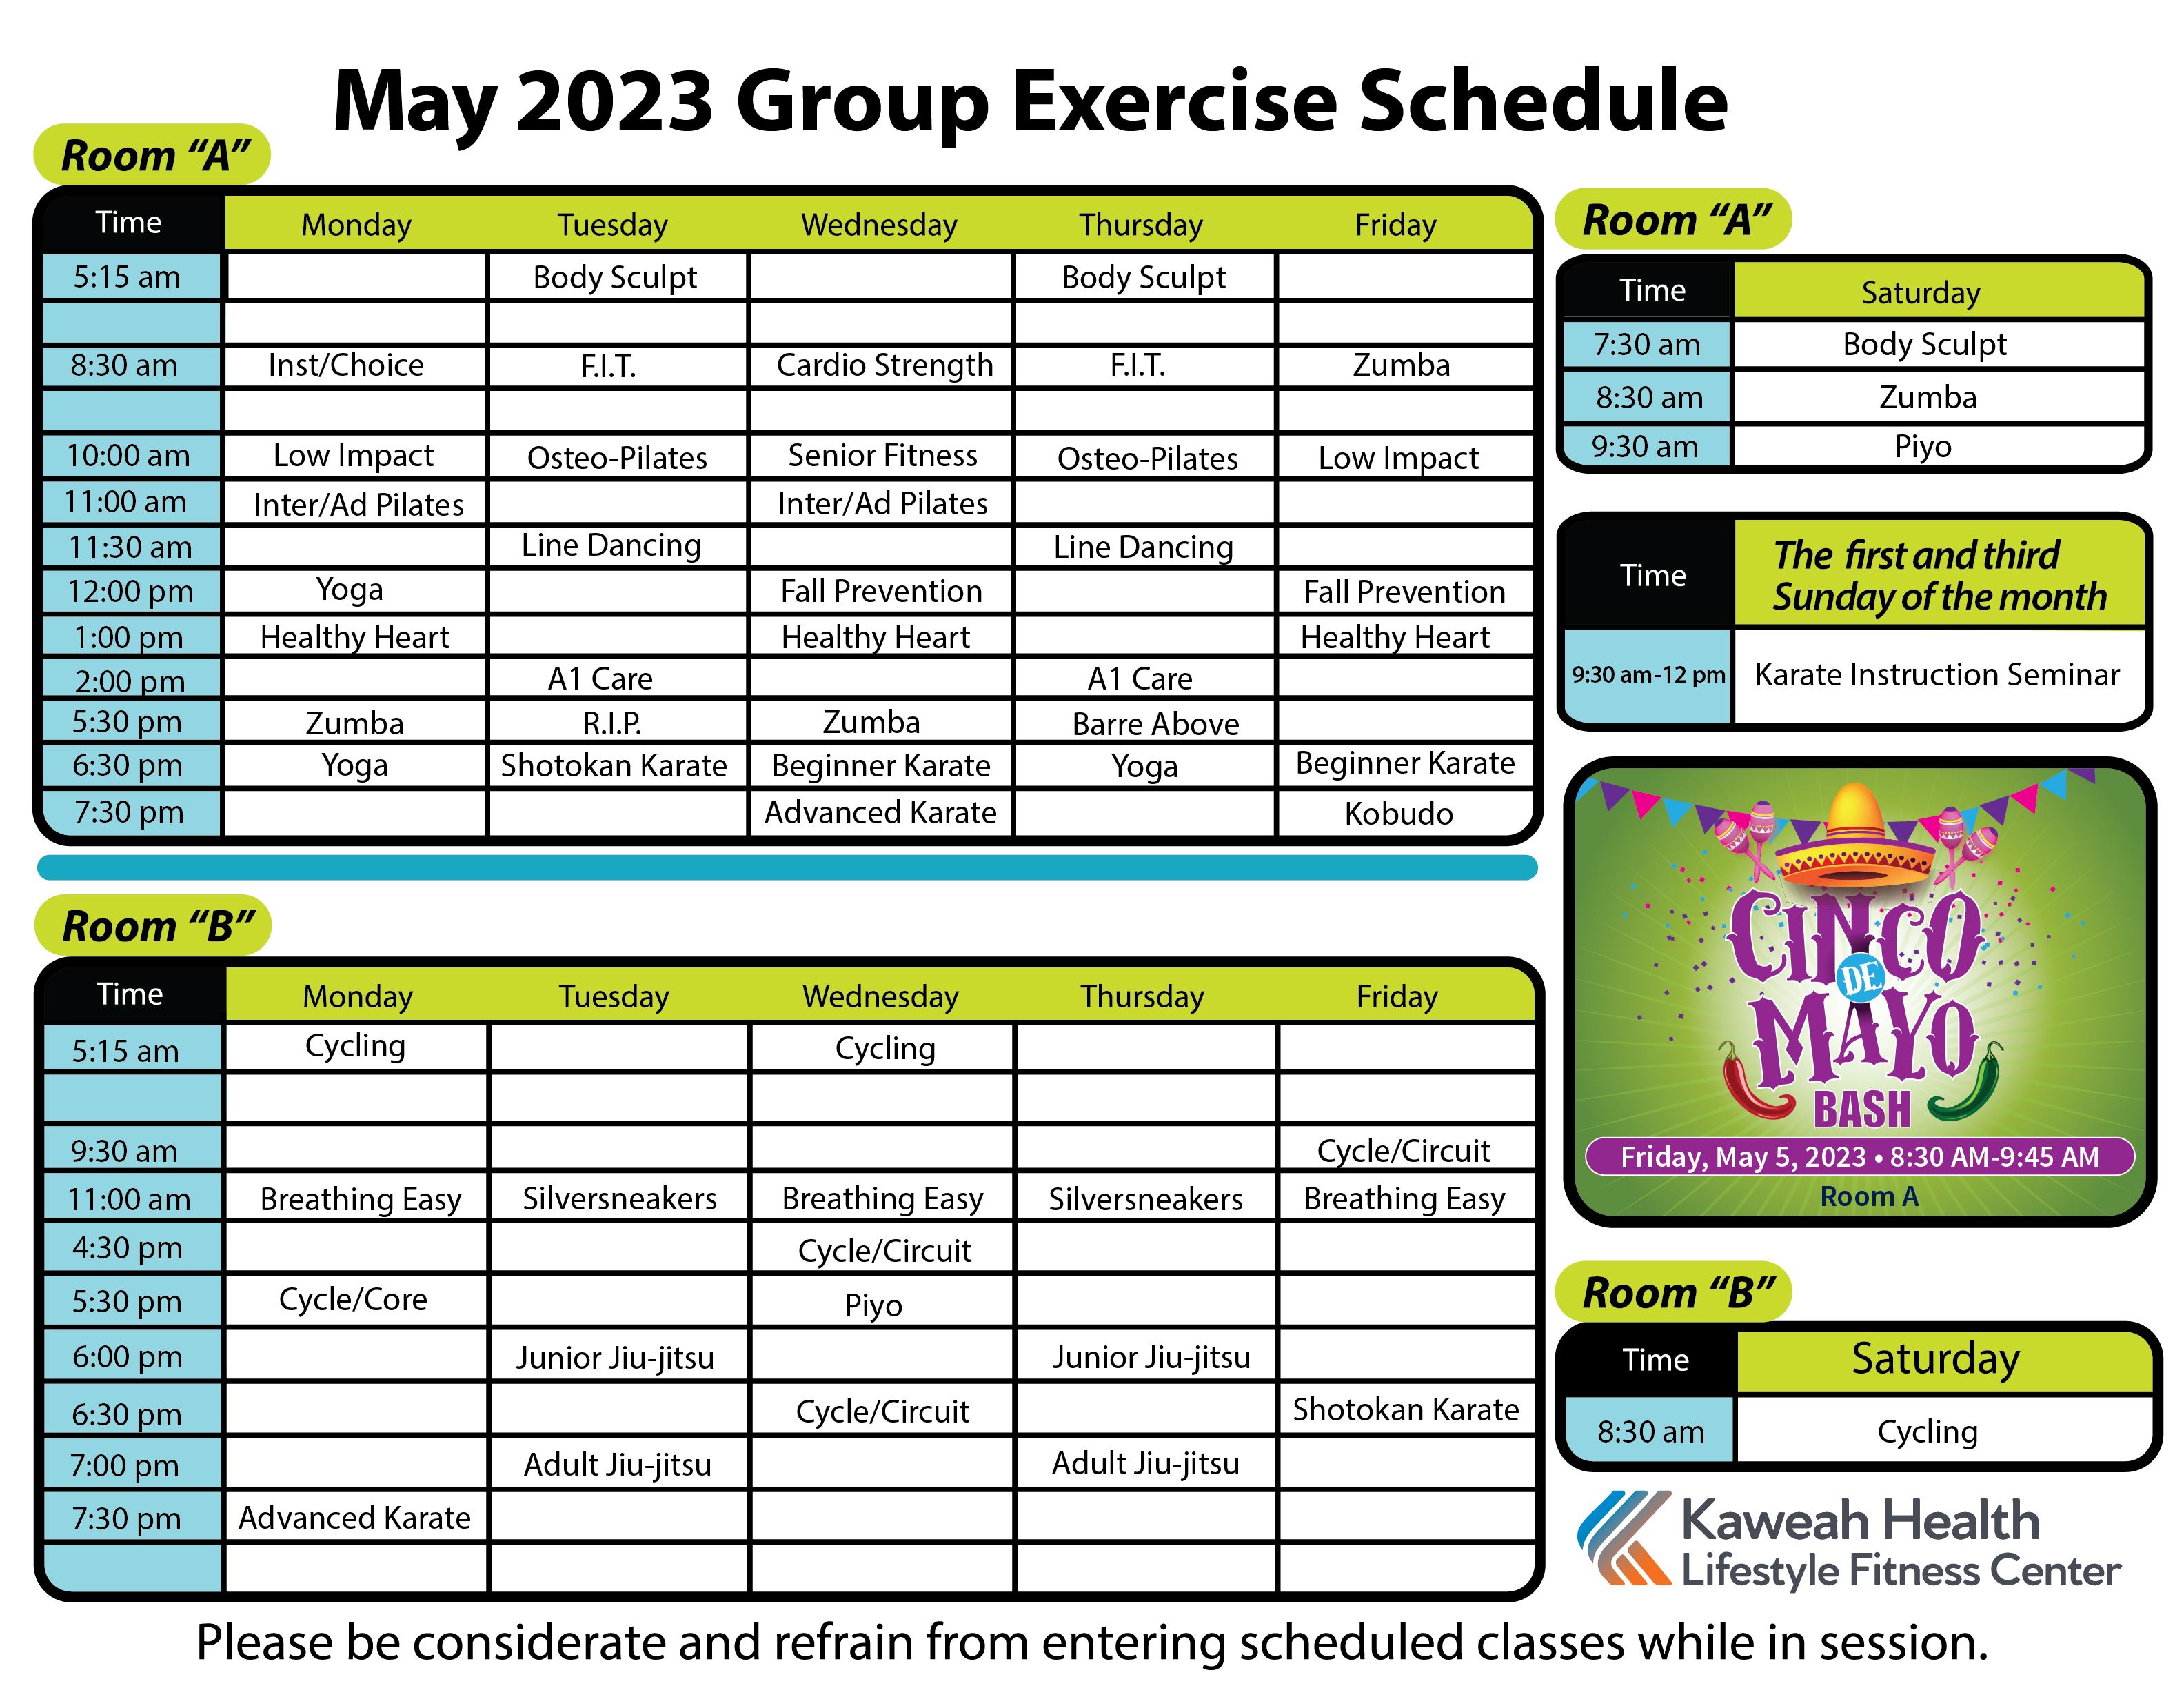 May Aerobic schedule 2023